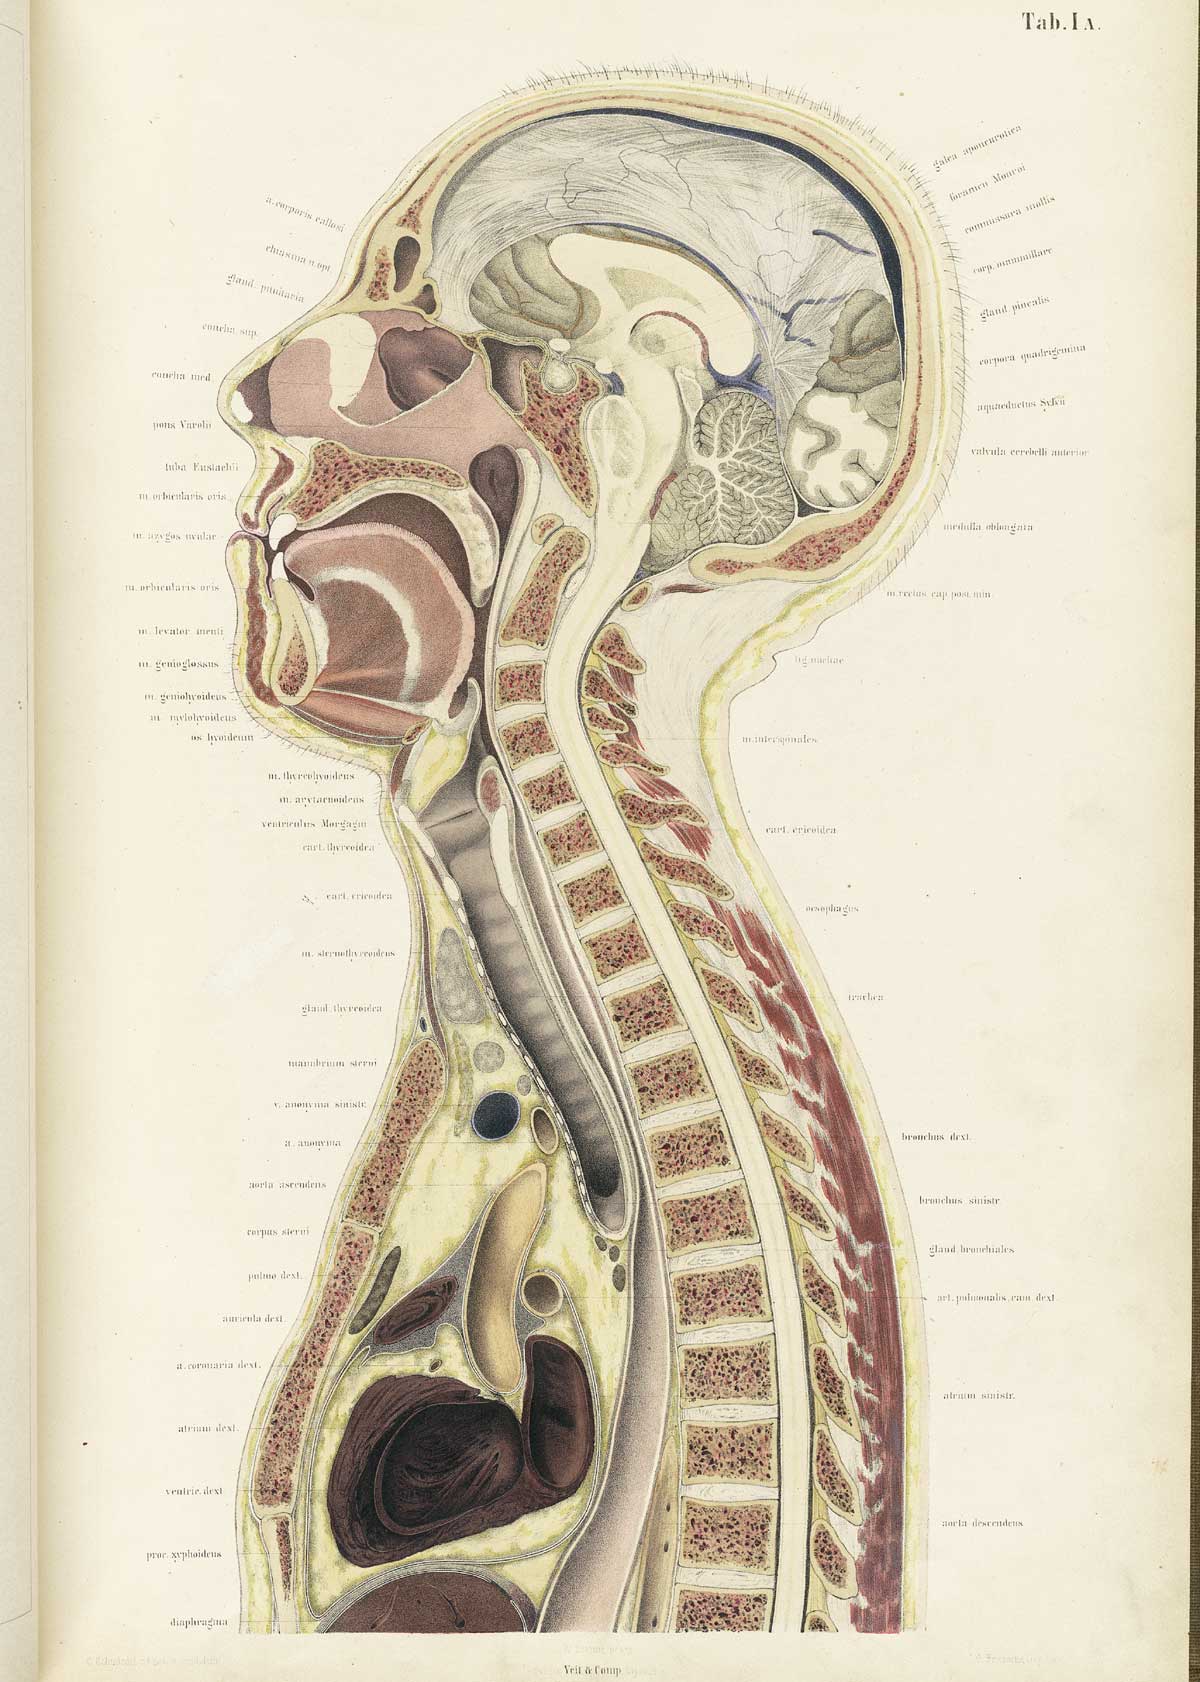 Chromolithograph of the cross-section of an adult male head and thorax of an individual facing to the left, exposing the brain, spinal column, moth, trachea, longs, heart and other organs and structures.